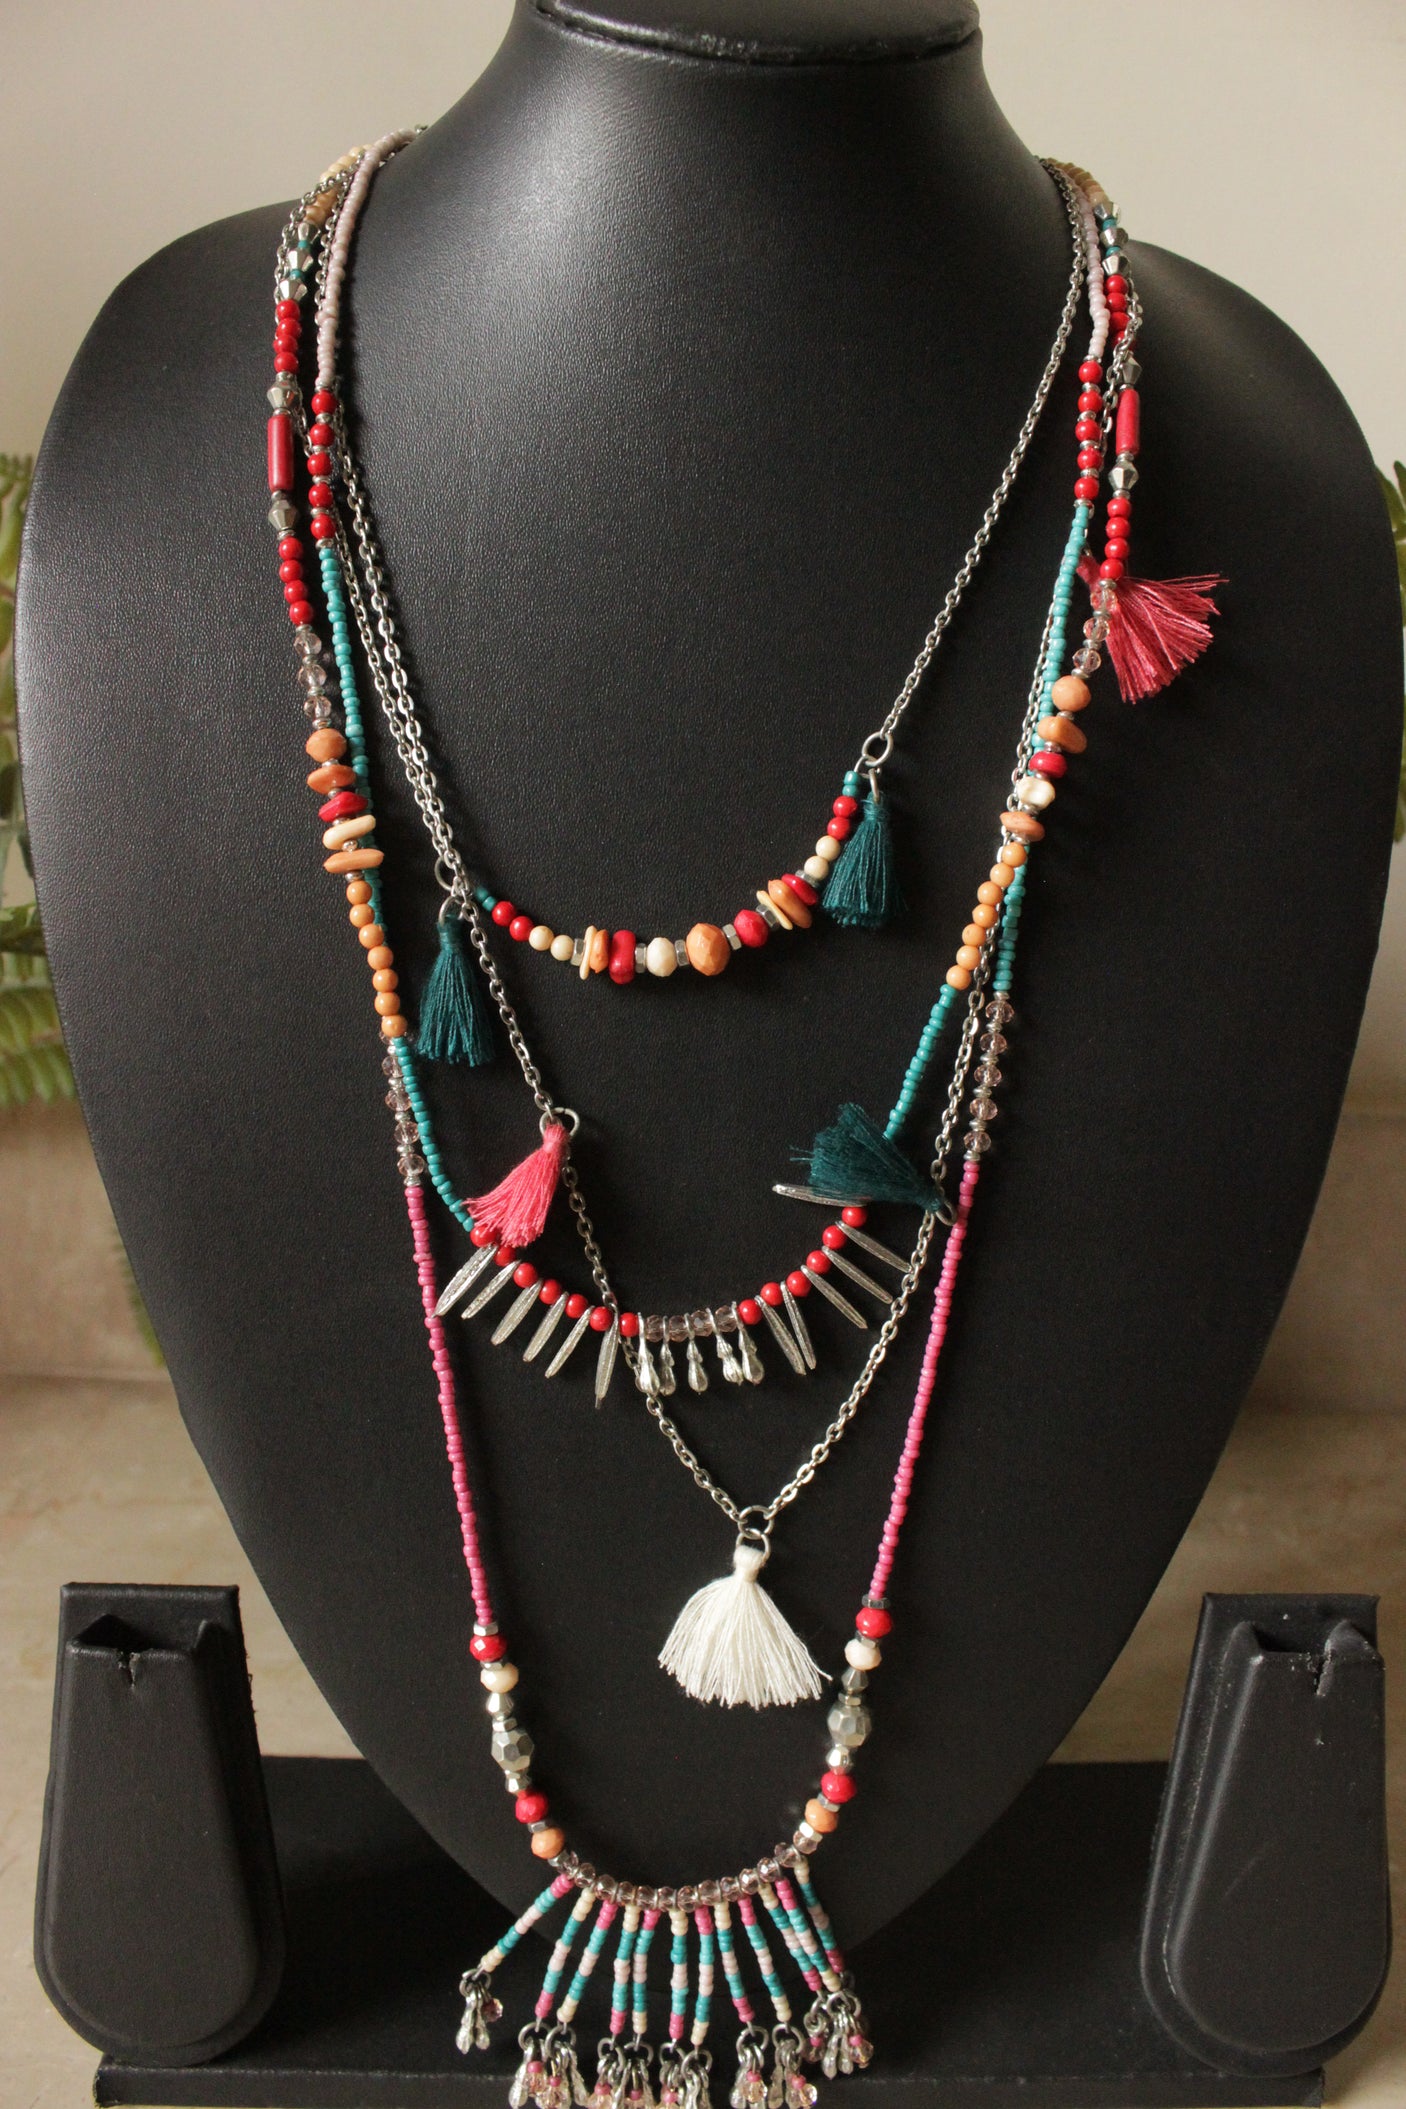 4 Layered Fabric, Beads and Metal Charms Long Necklace